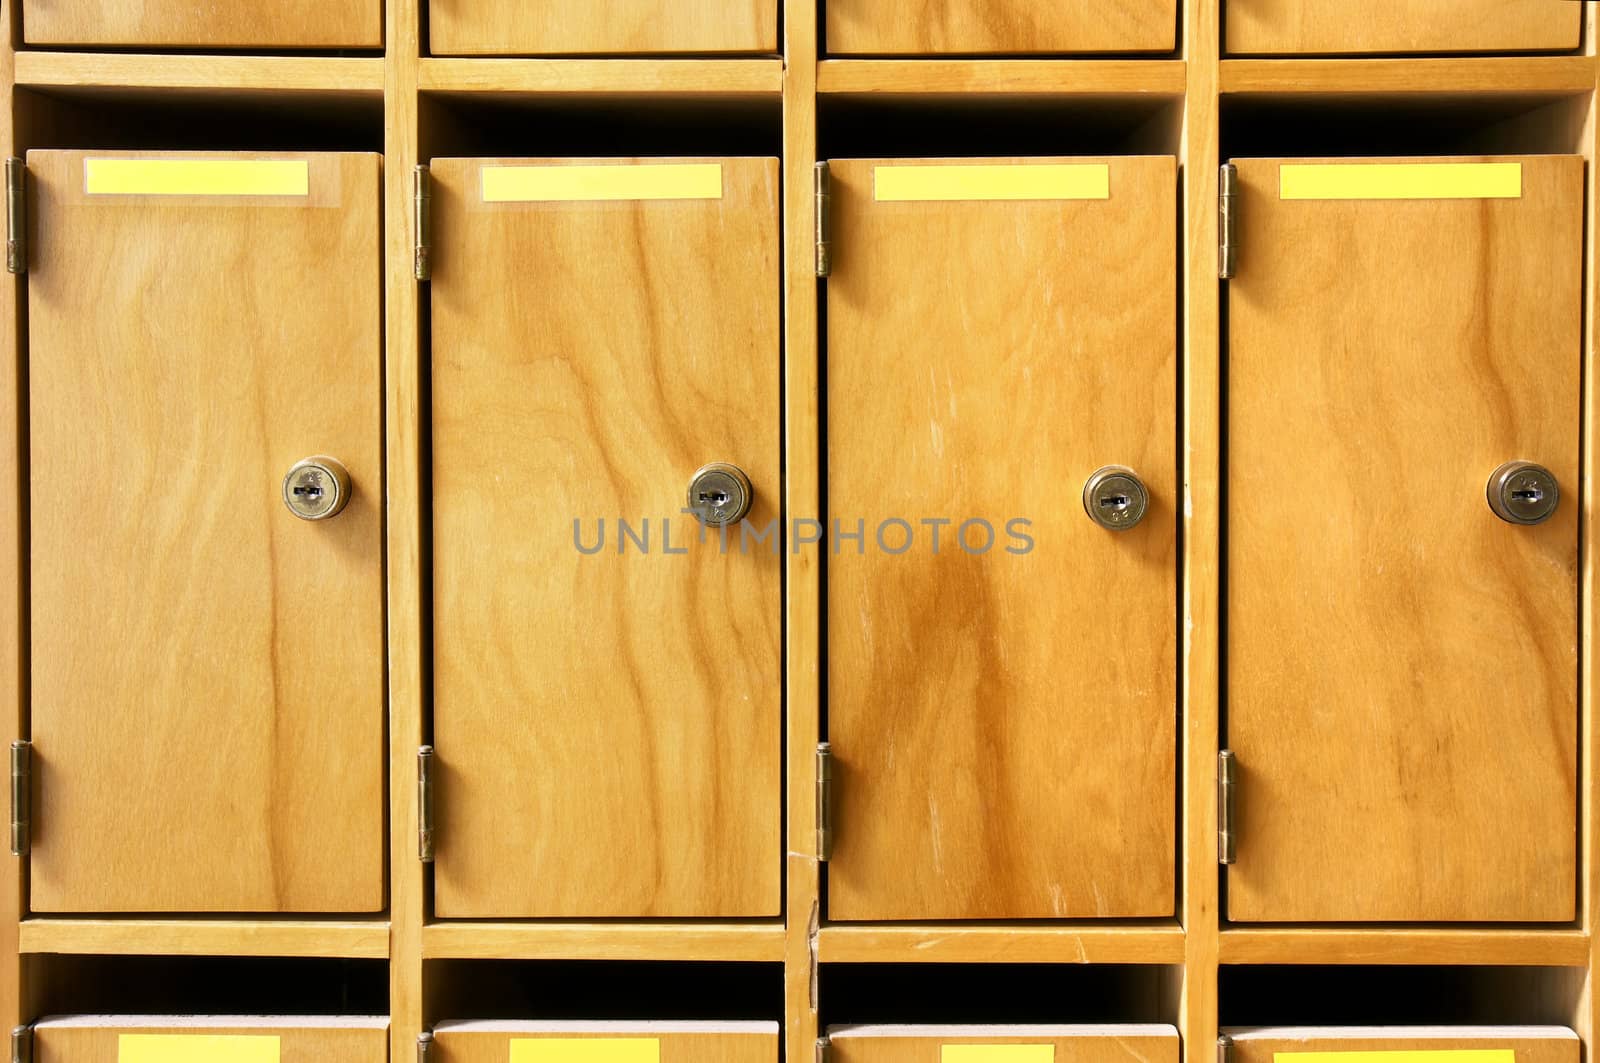 Wooden mailboxes with metal lock in office building or school.